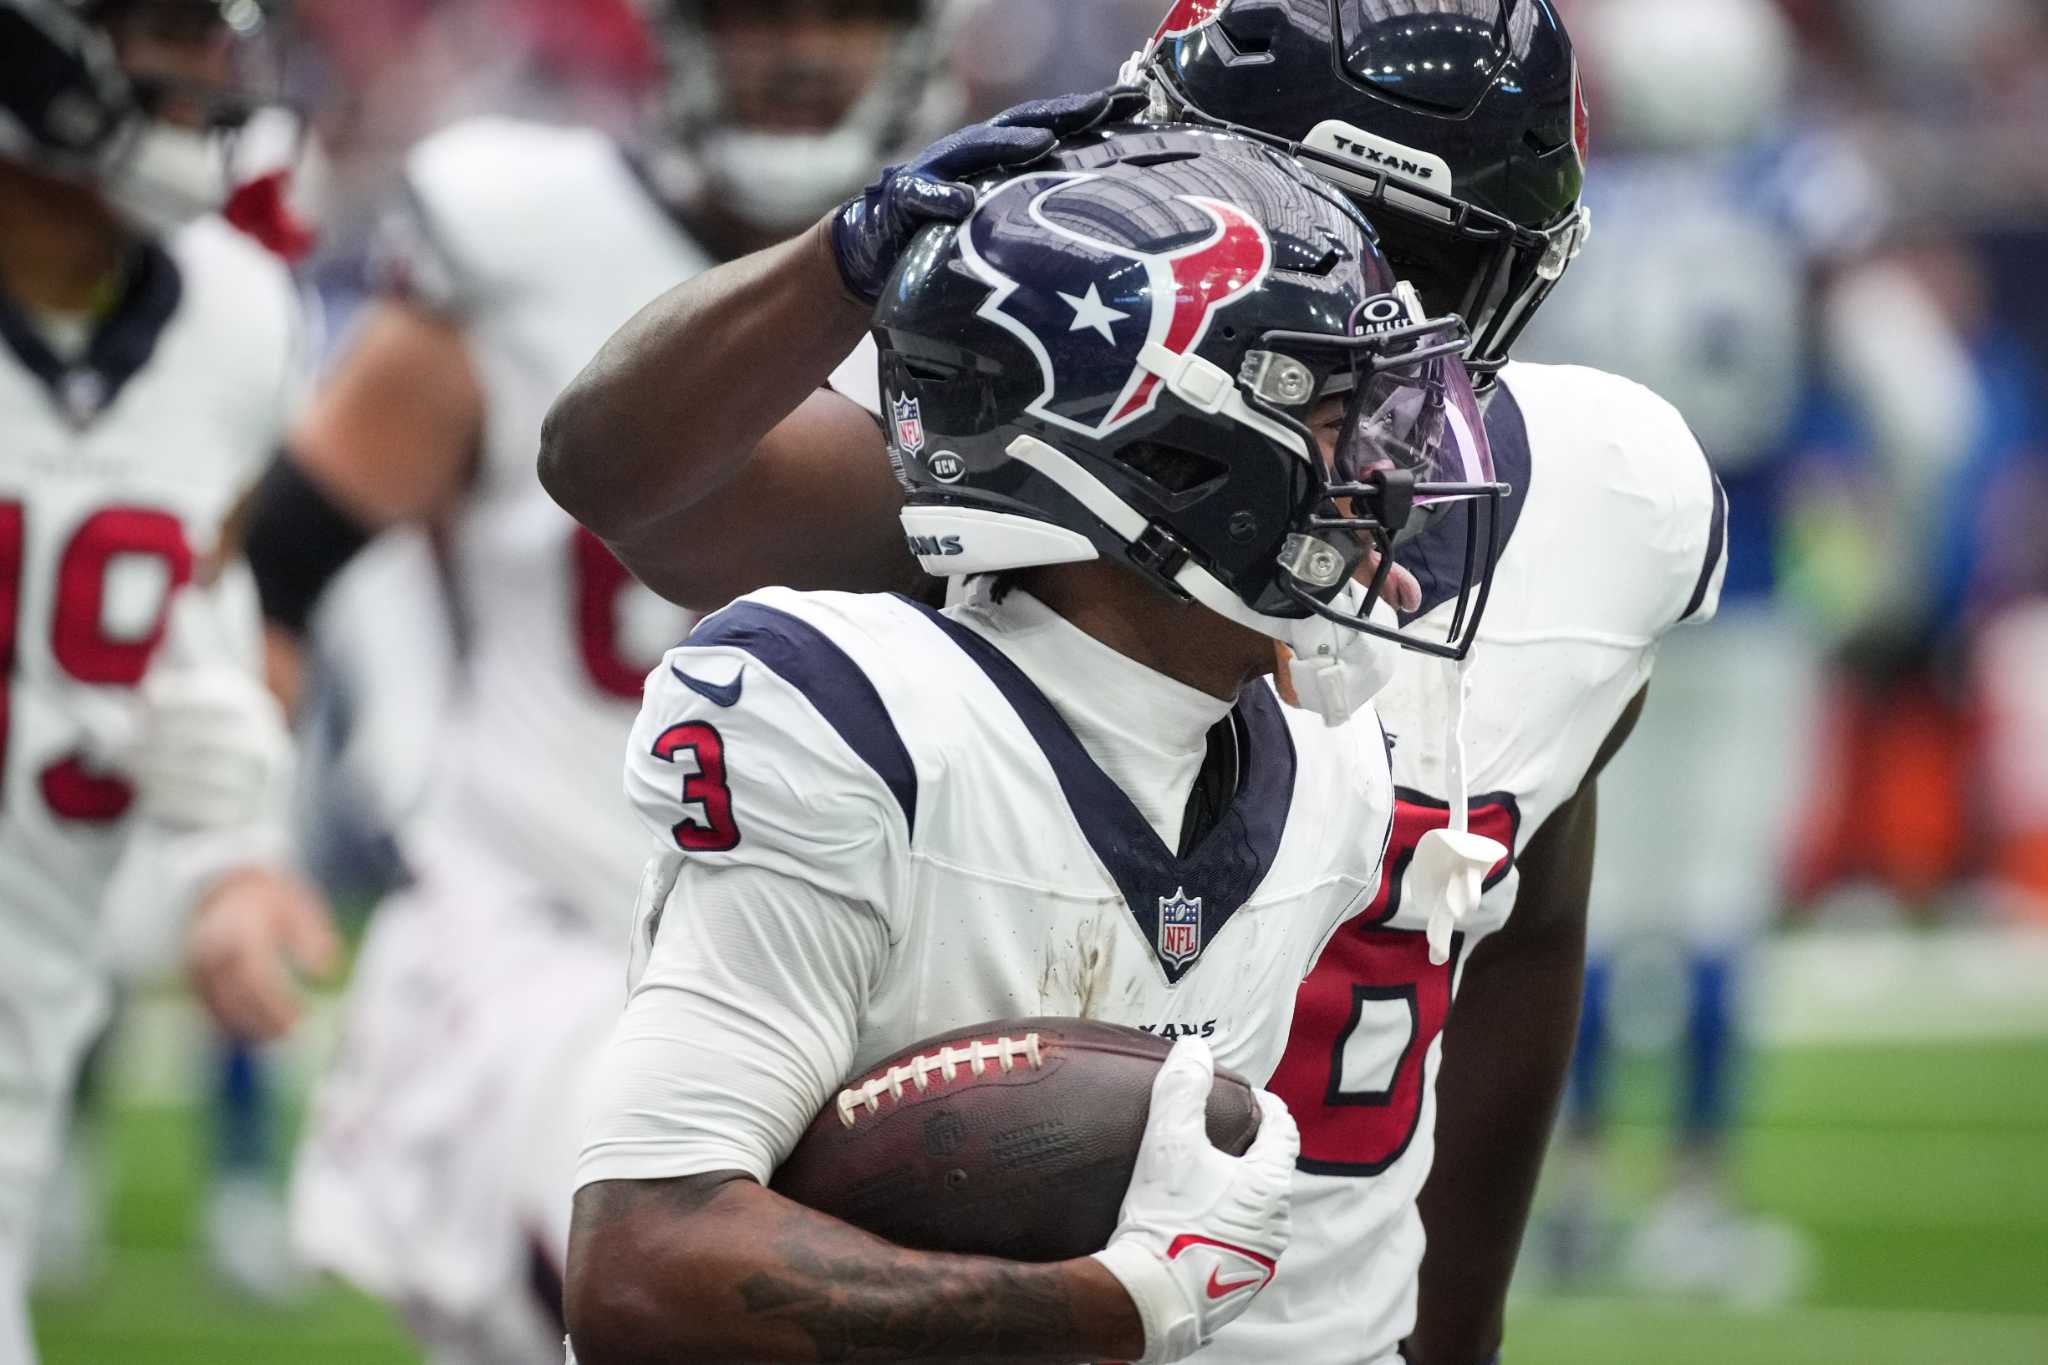 Houston Texans: Tank Dell returns to practice, on track to play Sunday